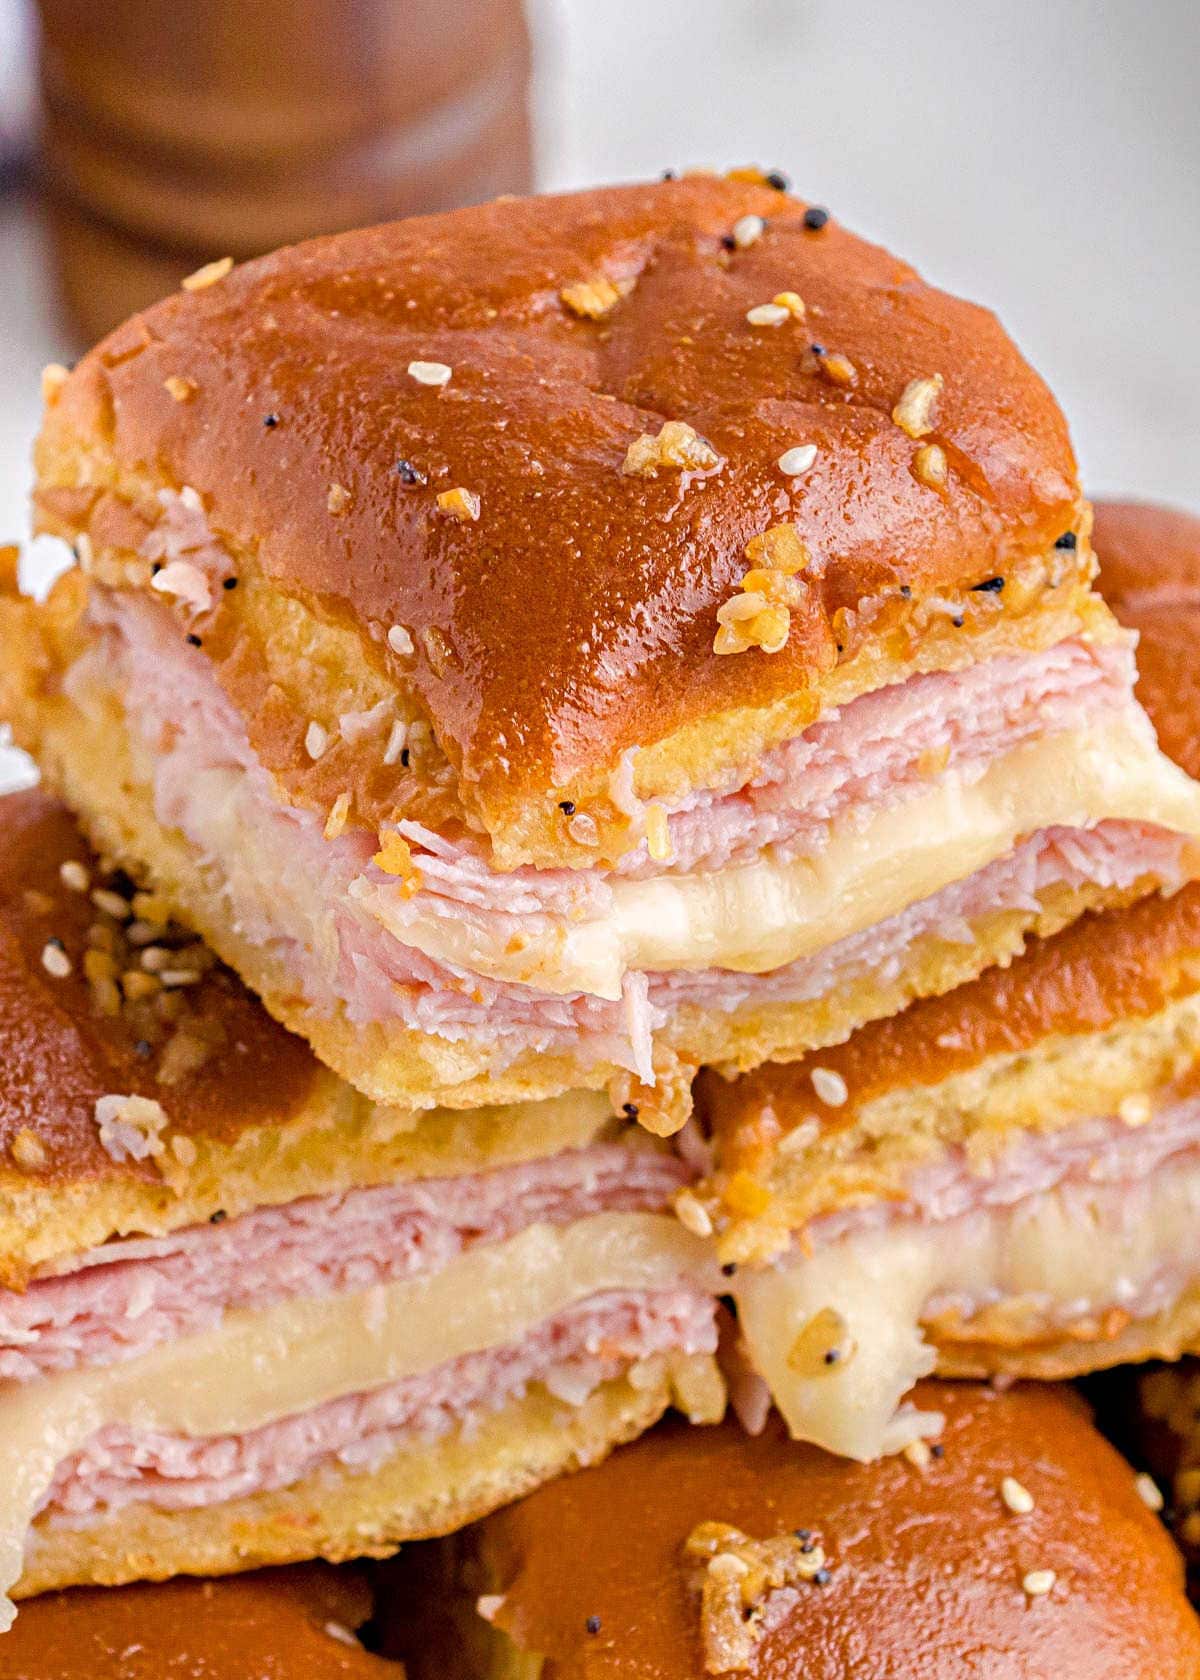 Ham and Cheese Sliders Recipe (Oven-baked and Easy)